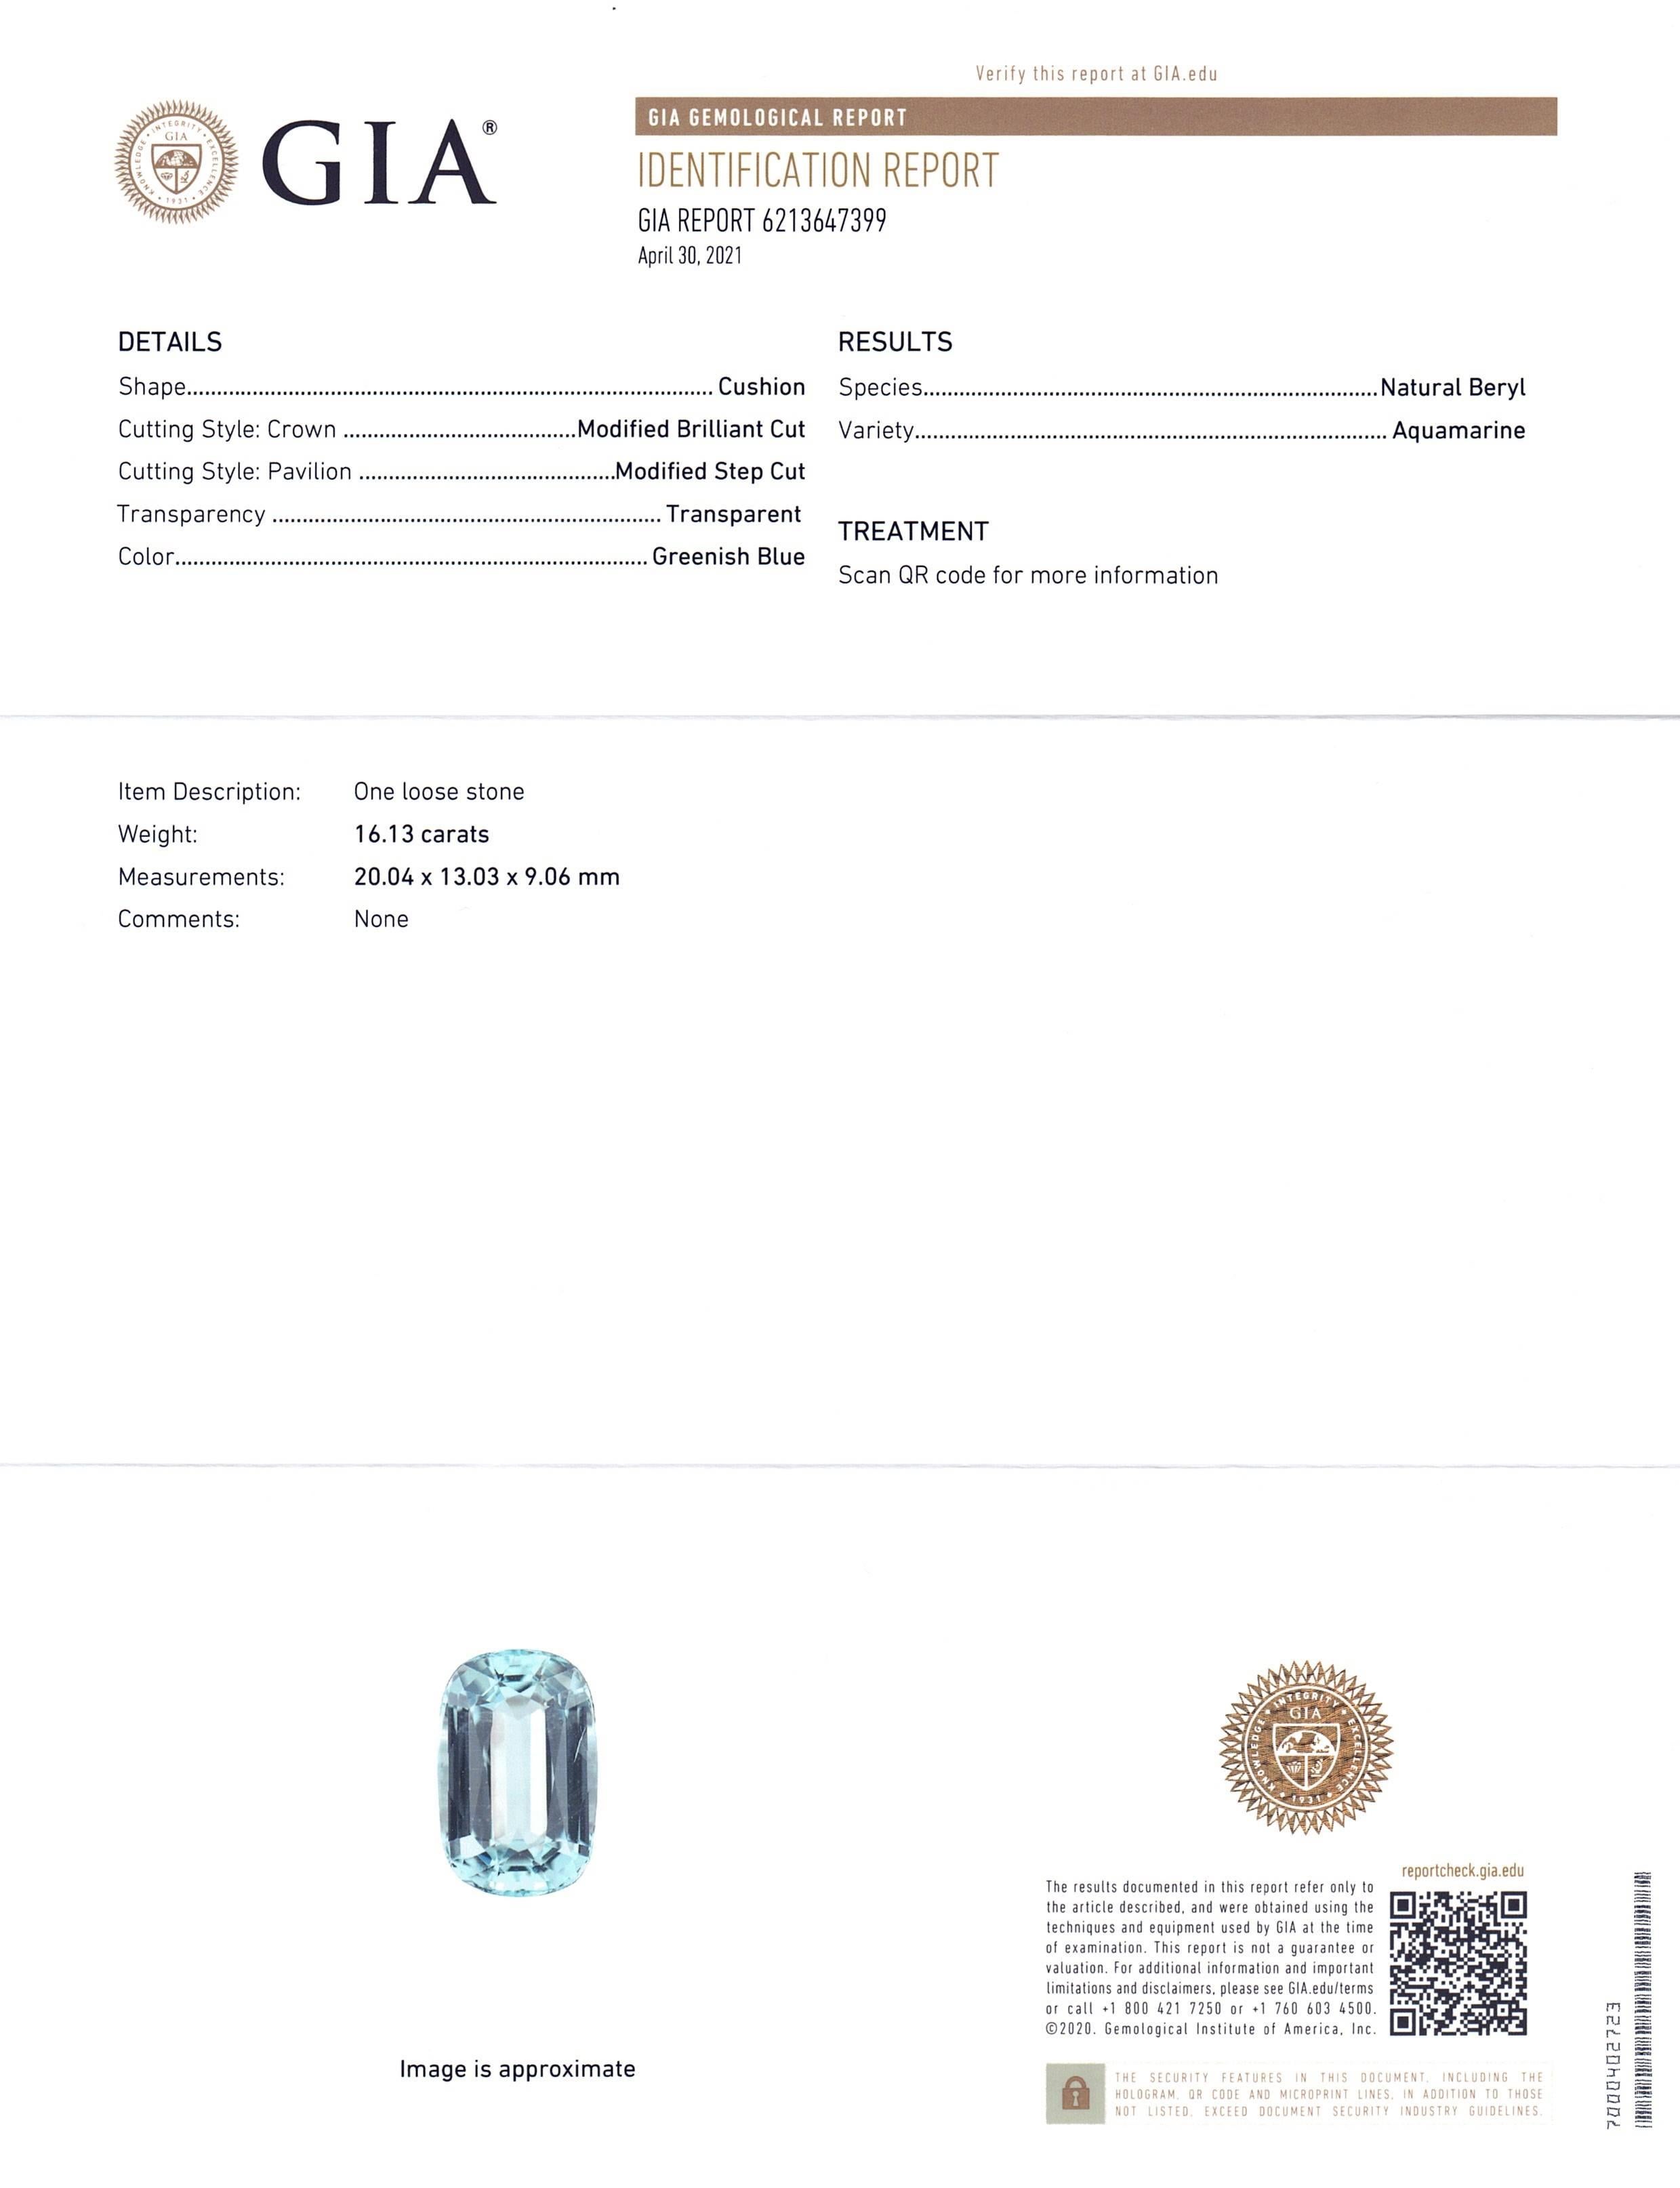 This is a stunning GIA Certified Aquamarine 

The GIA report reads as follows:

GIA Report Number: 6213647399
Shape: Cushion
Cutting Style: 
Cutting Style: Crown: Modified Brilliant Cut
Cutting Style: Pavilion: Modified Step Cut
Transparency: